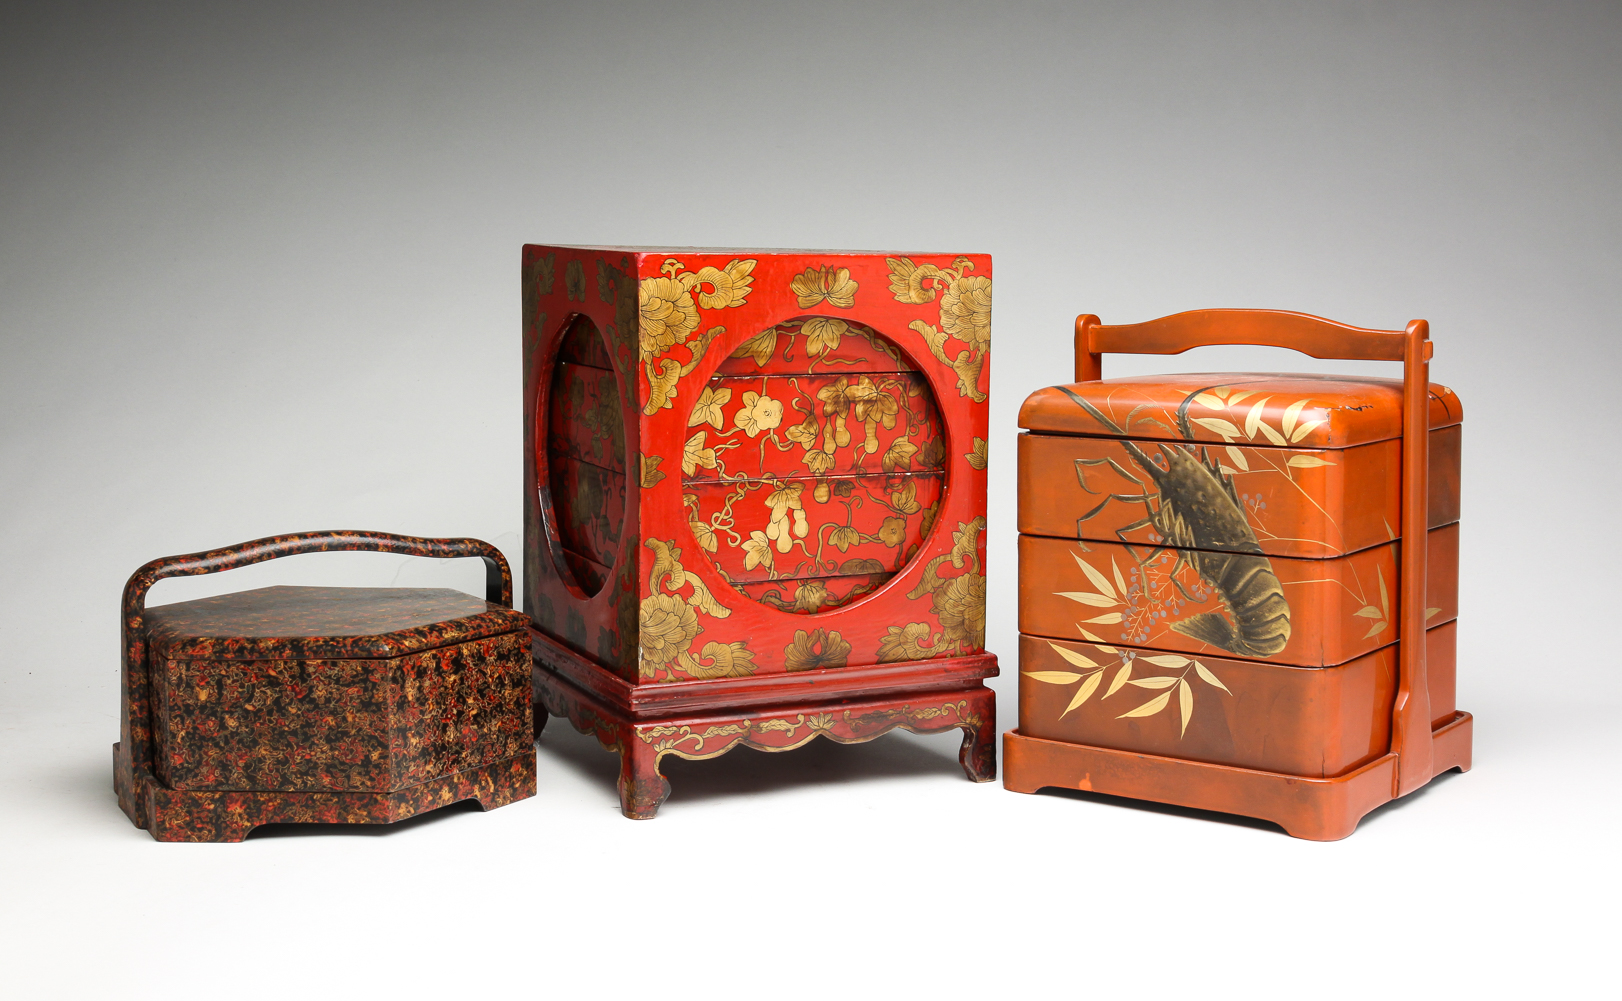 THREE ASIAN LACQUERWARE STACKED